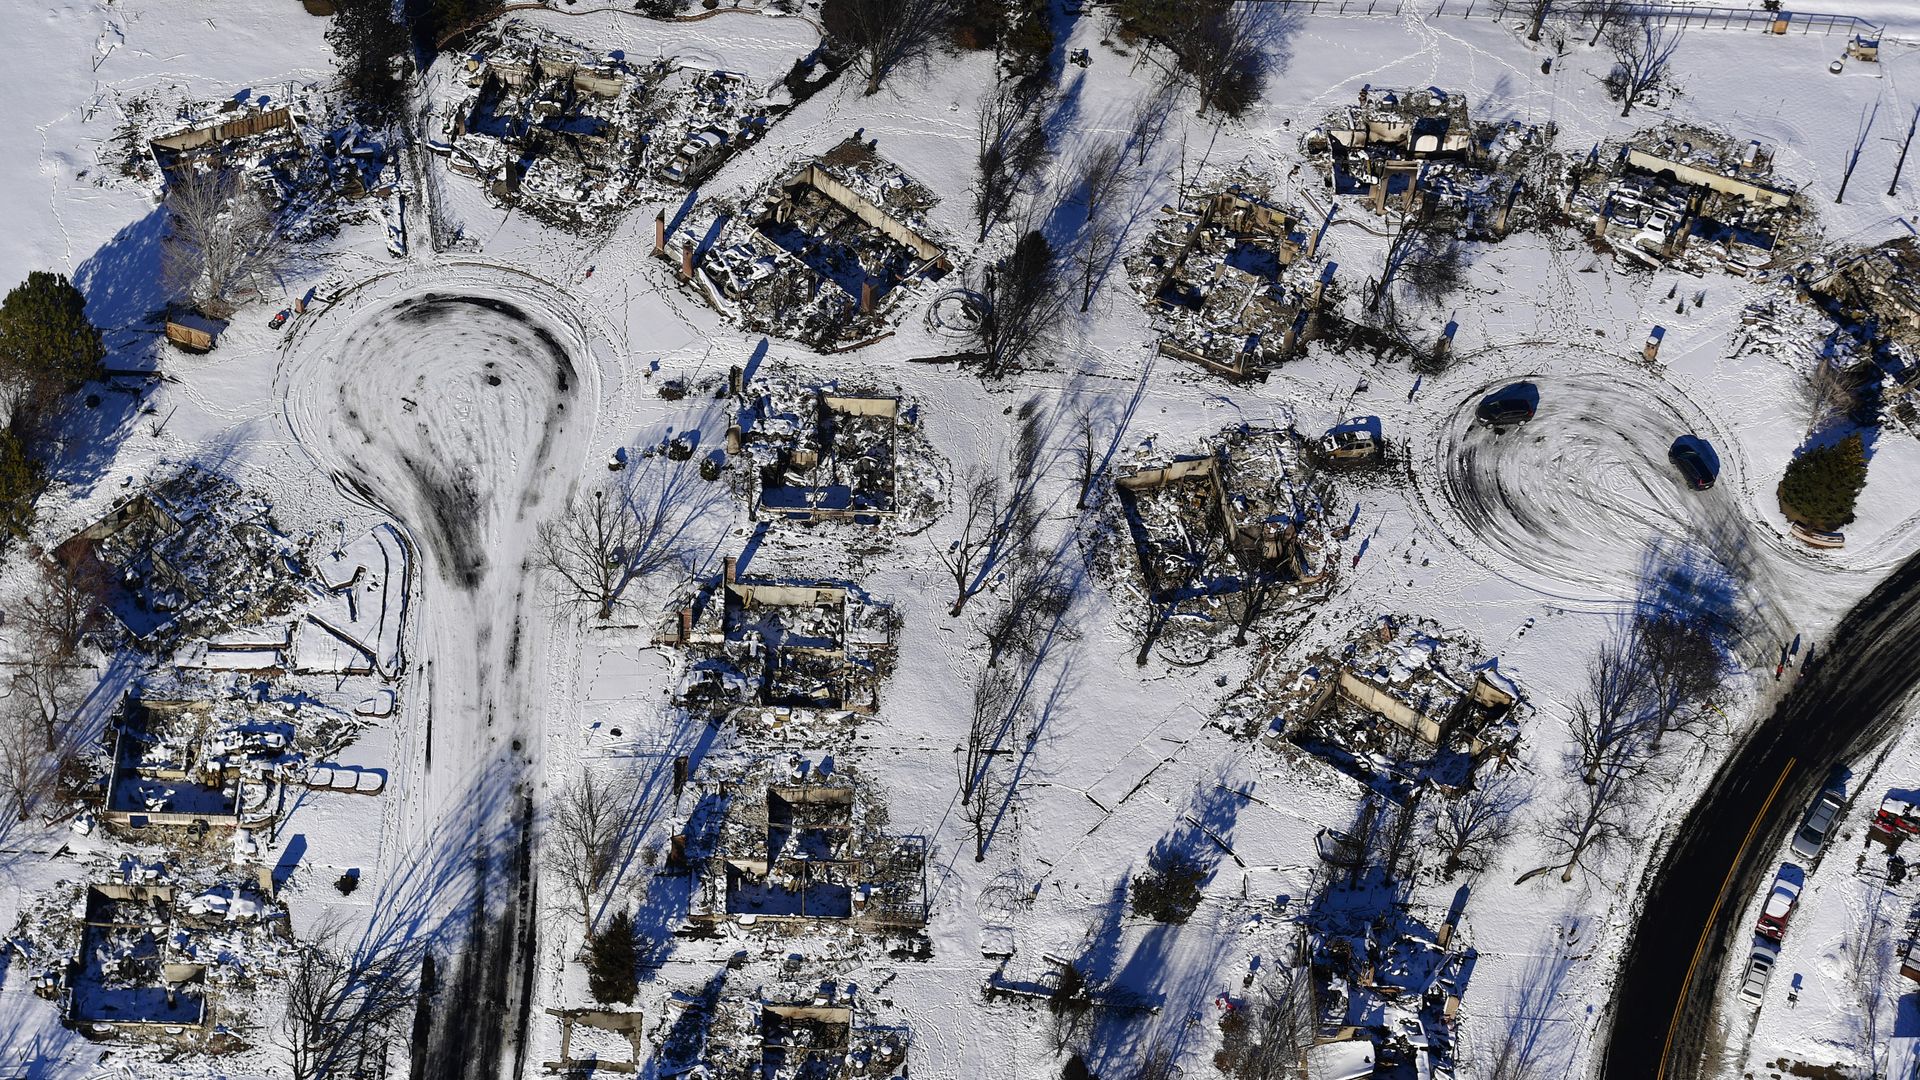 Aerial photos of the devastated neighborhoods left behind from the Marshall Fire in Louisville.